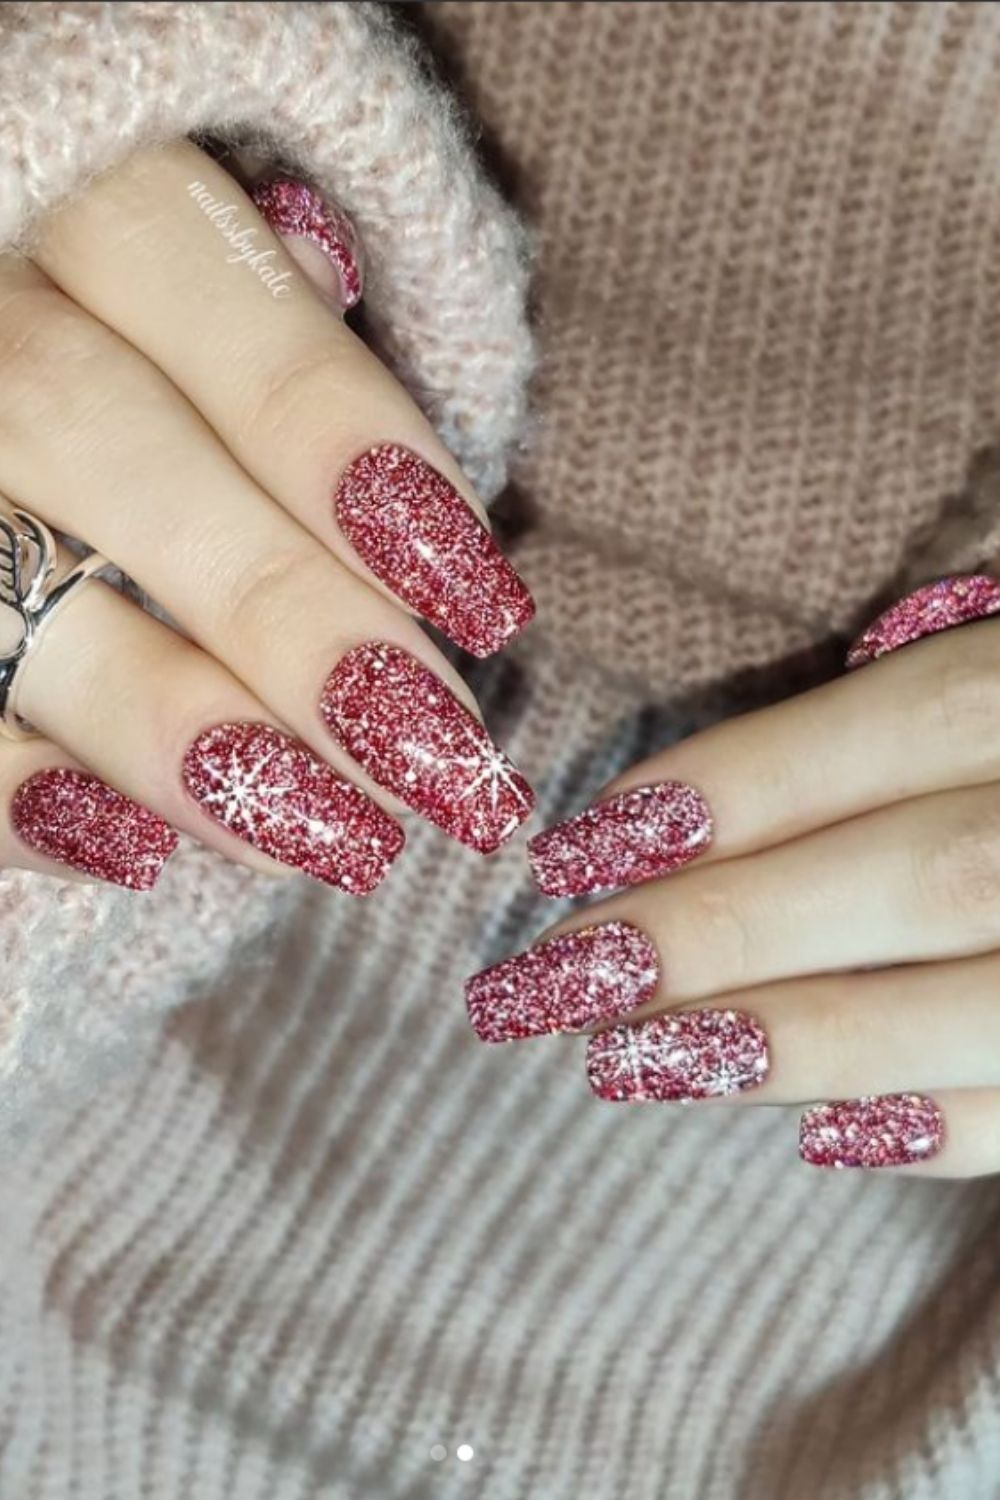 Red glitter winter nails art with snow